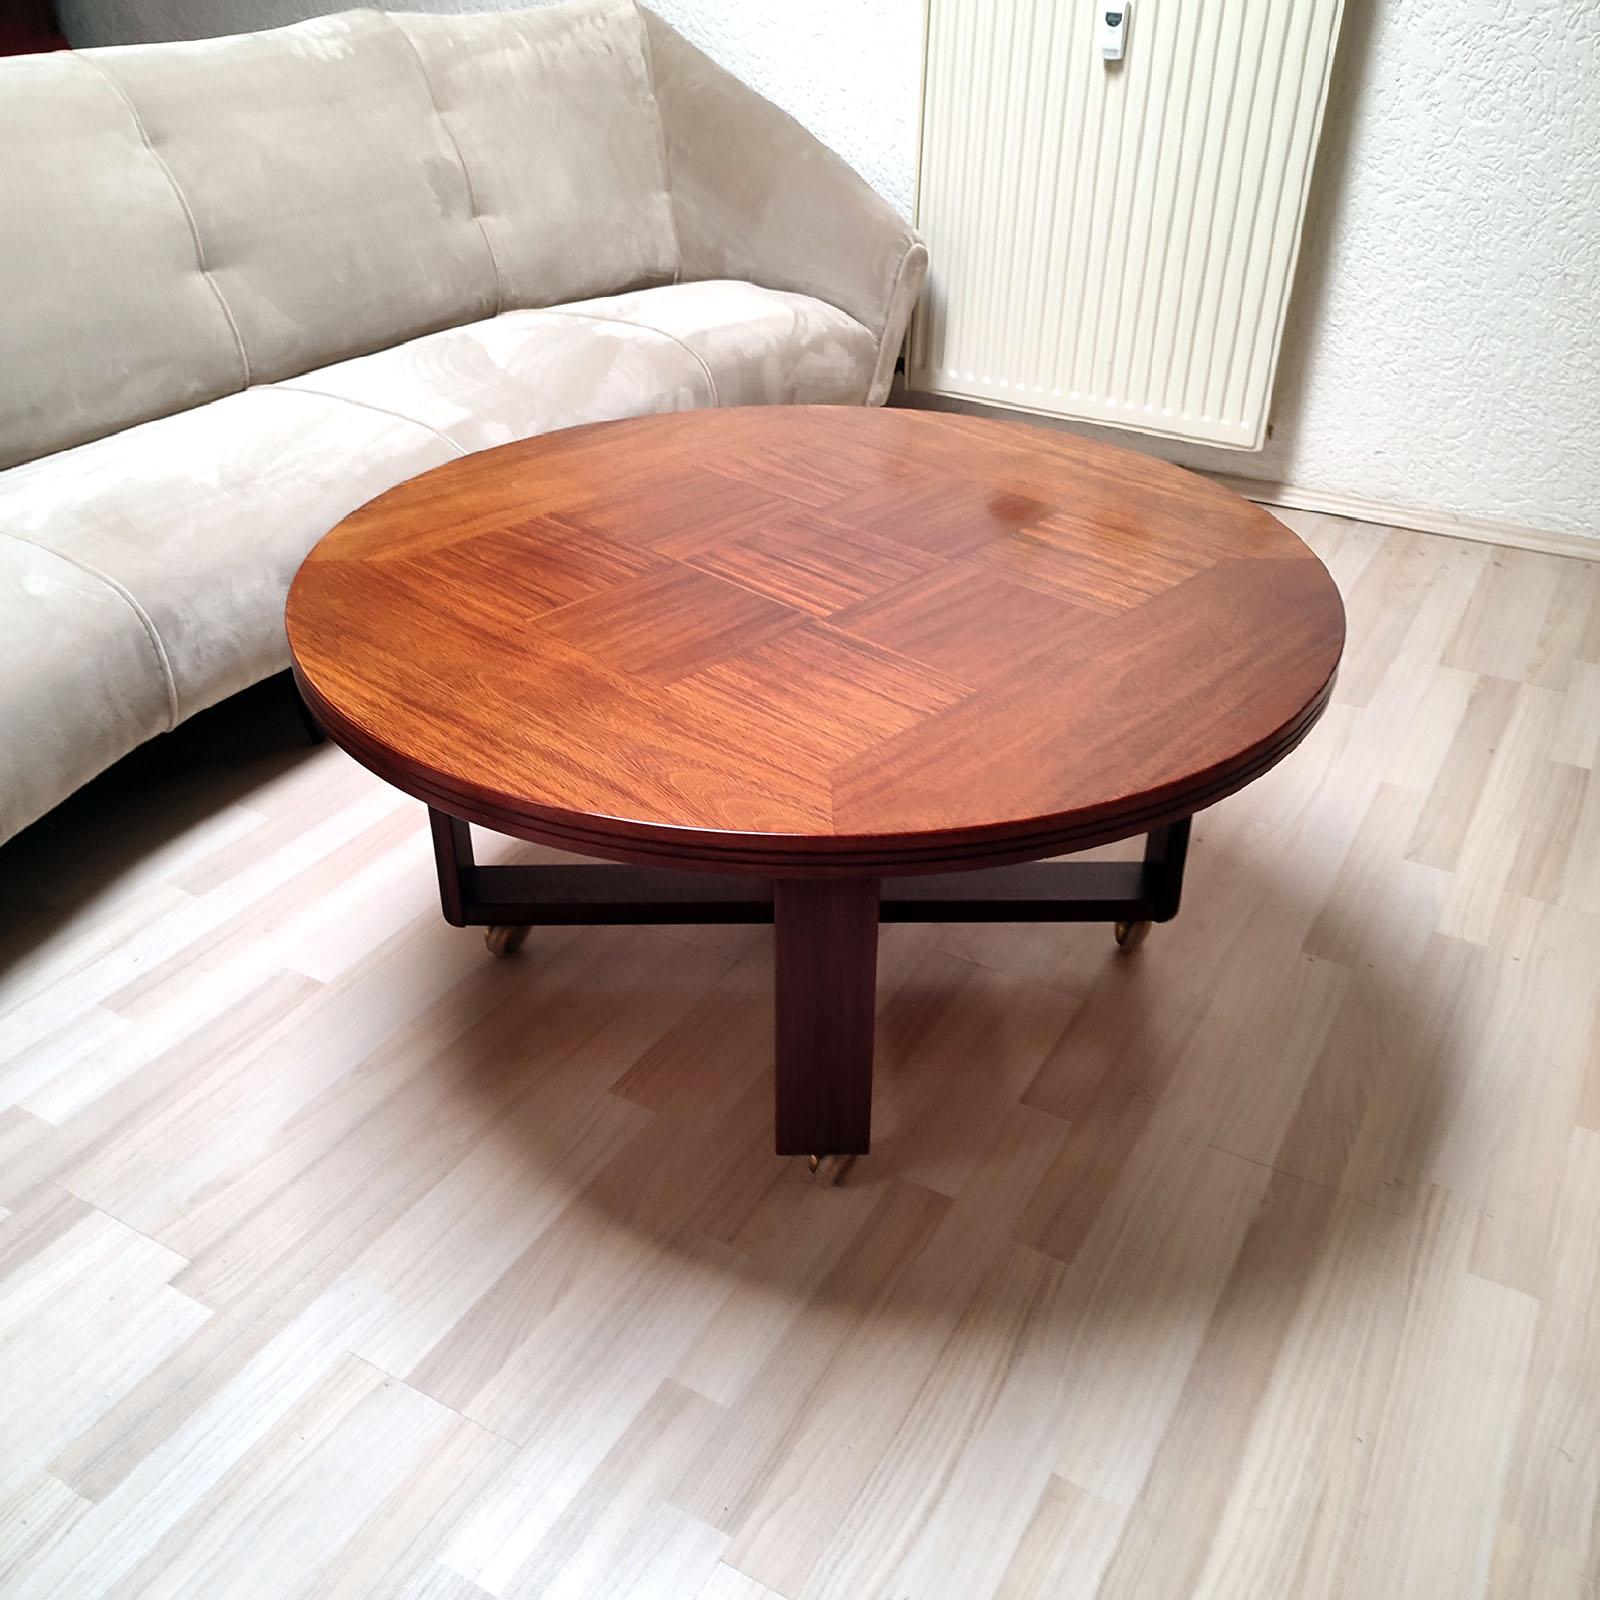 Mid-Century Modern Round Coffee Sofa Table on Castors, Sweden 1970s For Sale 2